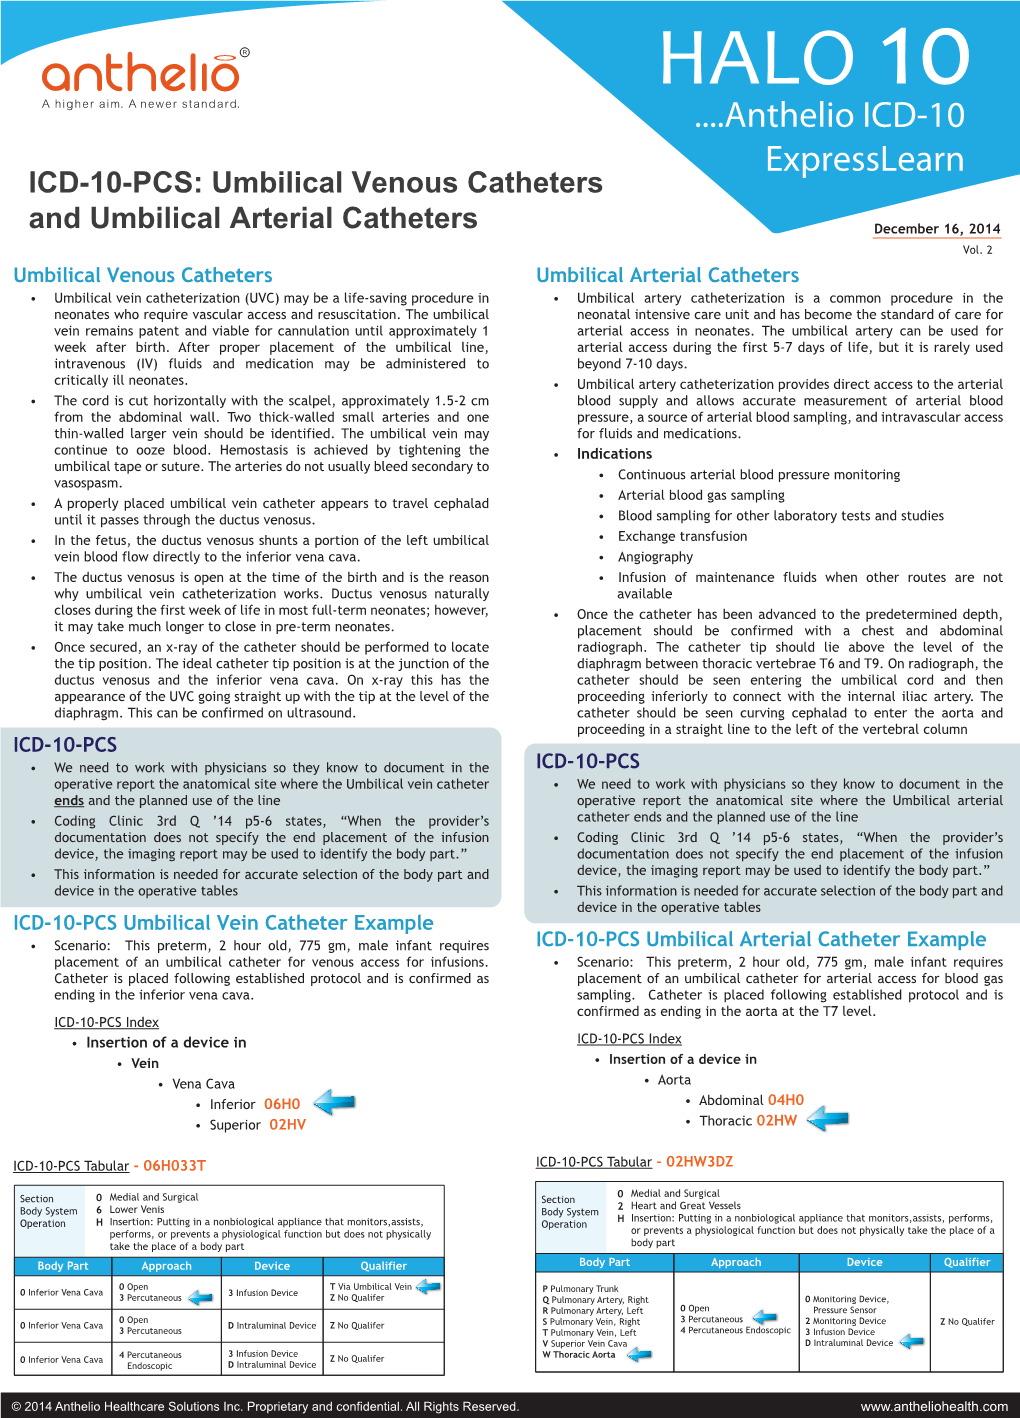 Umbilical Venous and Arterial Catheters